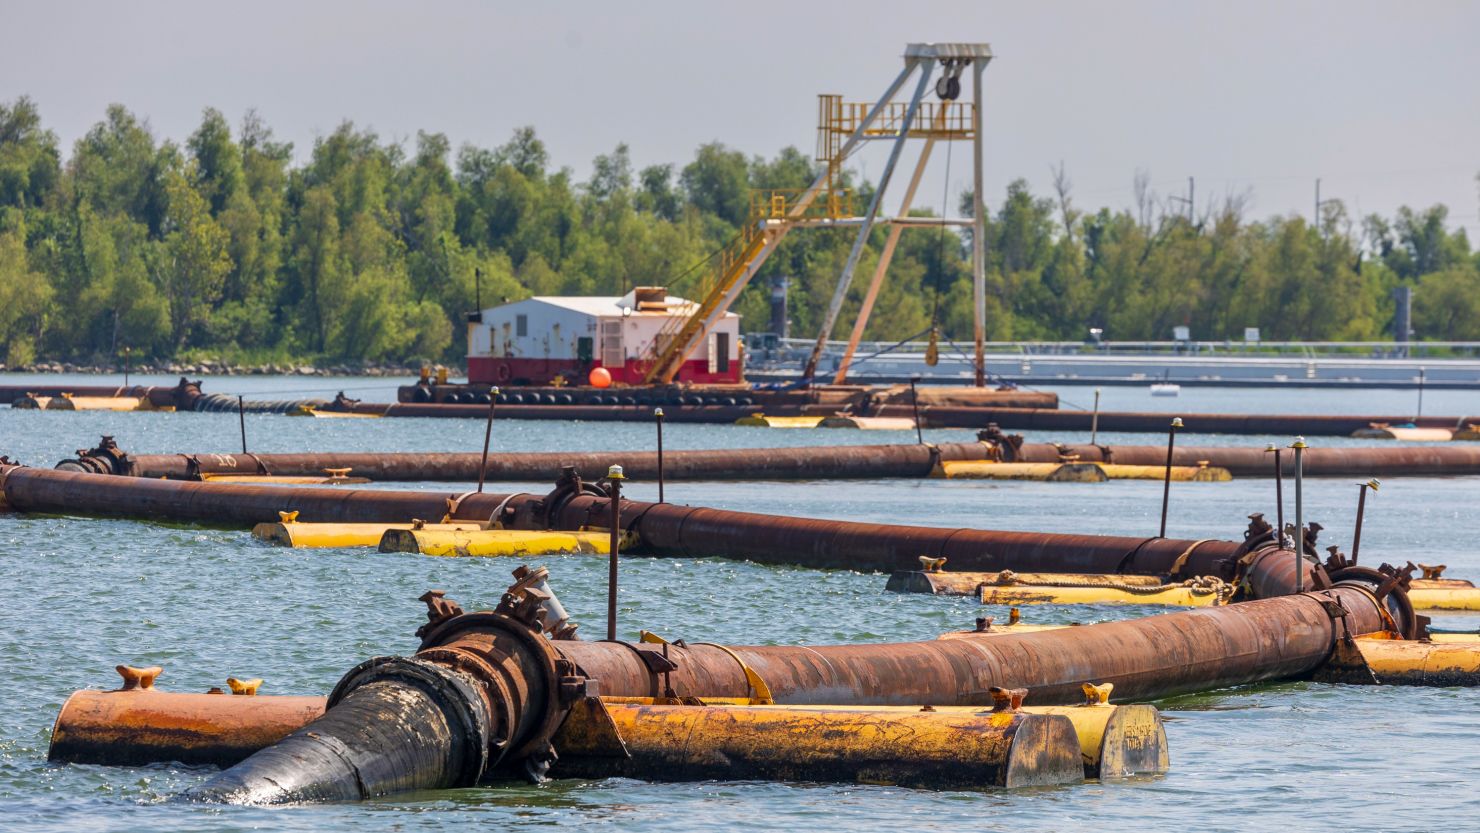 Pipes carrying sediment crisscross the Mississippi River where the US Army Corps of Engineers is building up an underwater sill intended slow the flow of saltwater up the Mississippi River south of New Orleans on Tuesday.